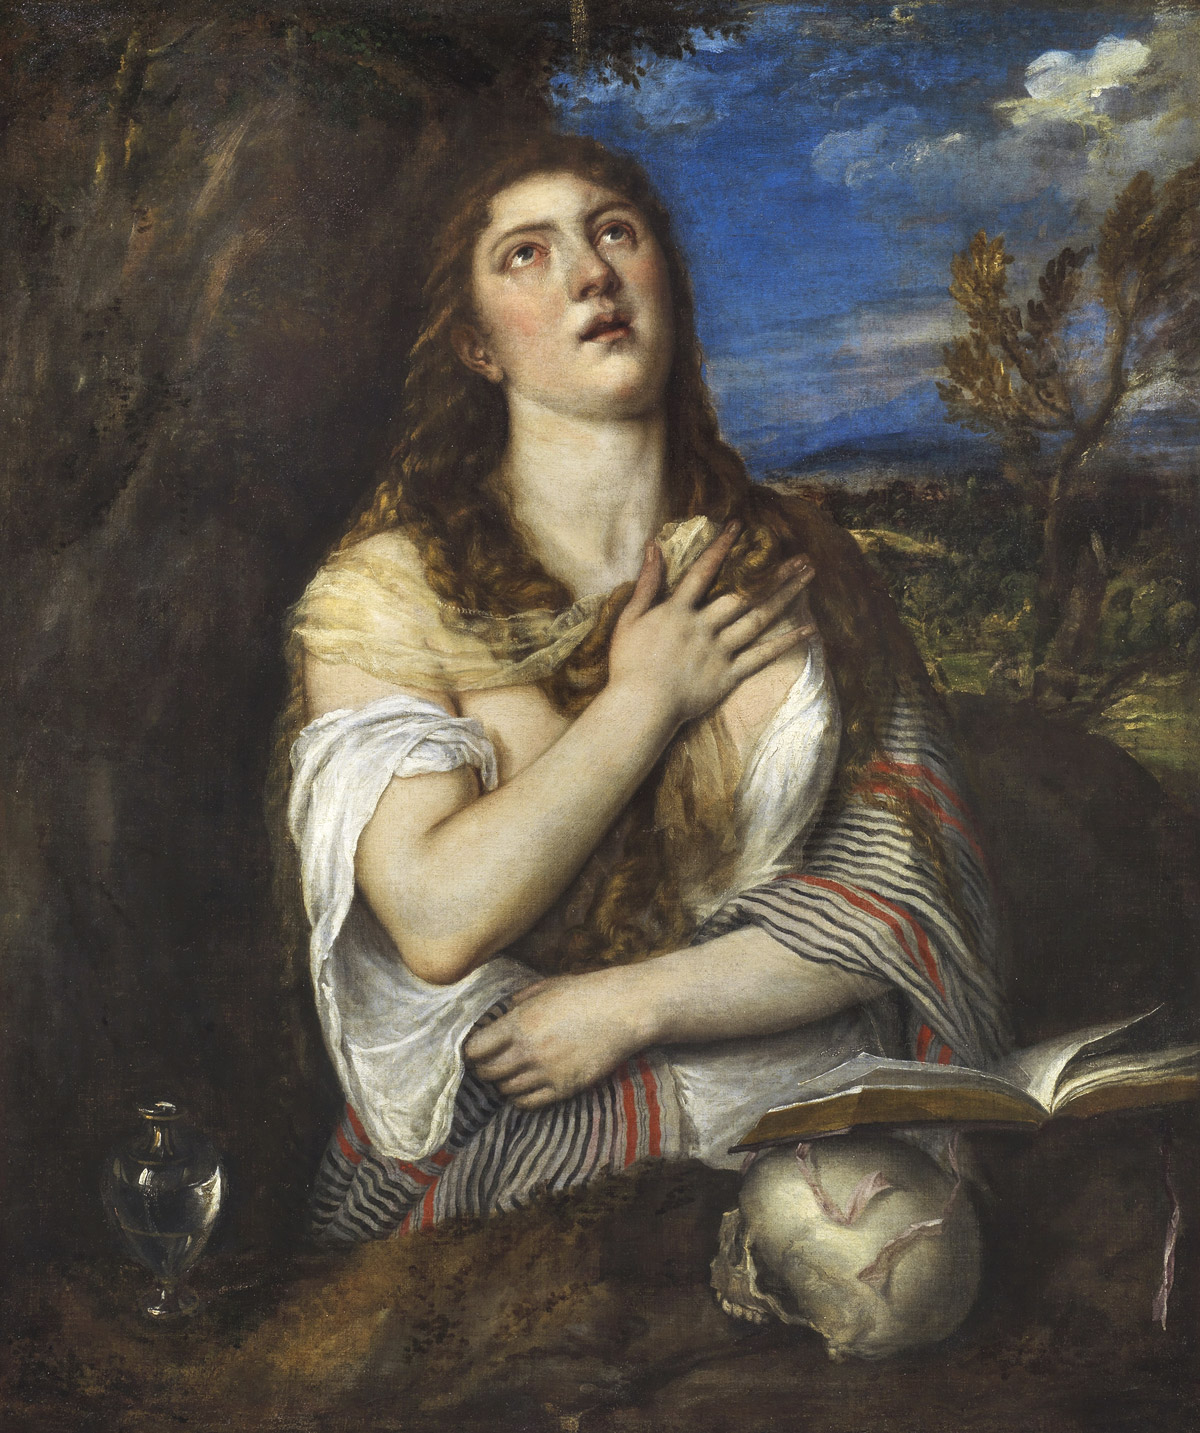 Titian, St Mary Magdalen in the Wilderness (Orléans Magdalen), about 1560–2, private collection